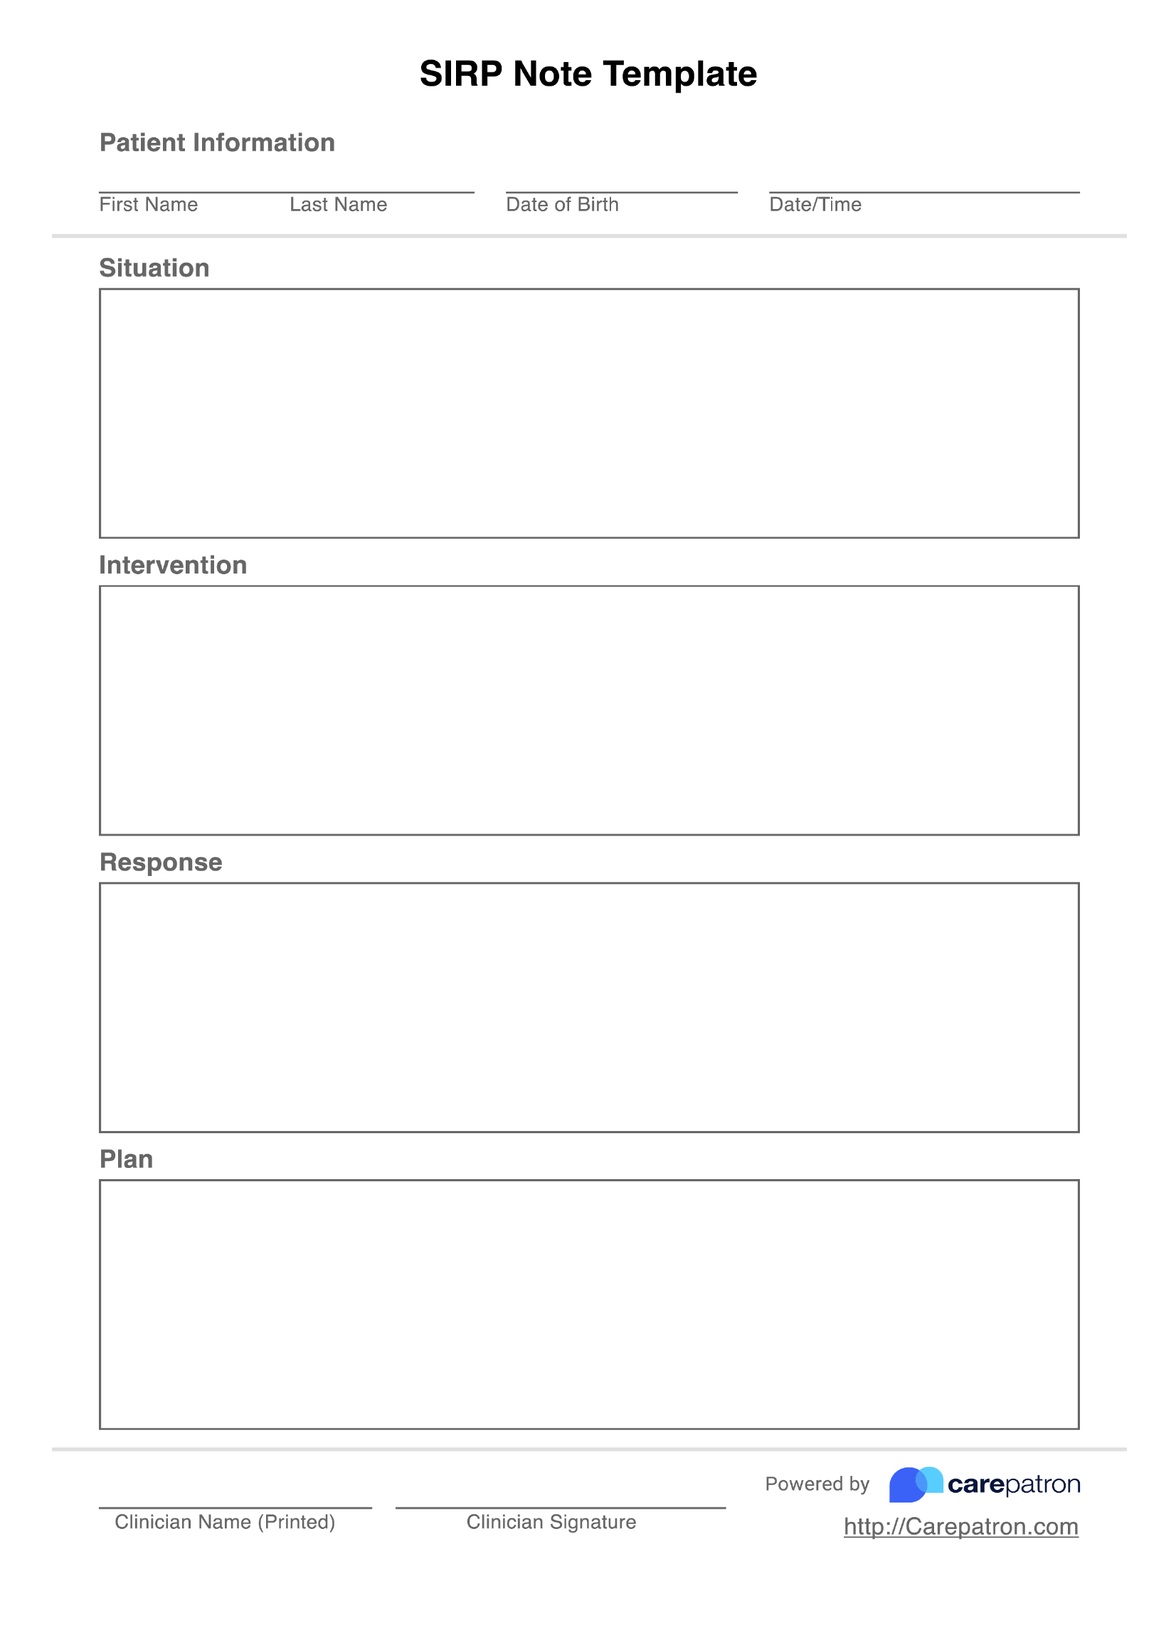 SIRP Note Template PDF Example